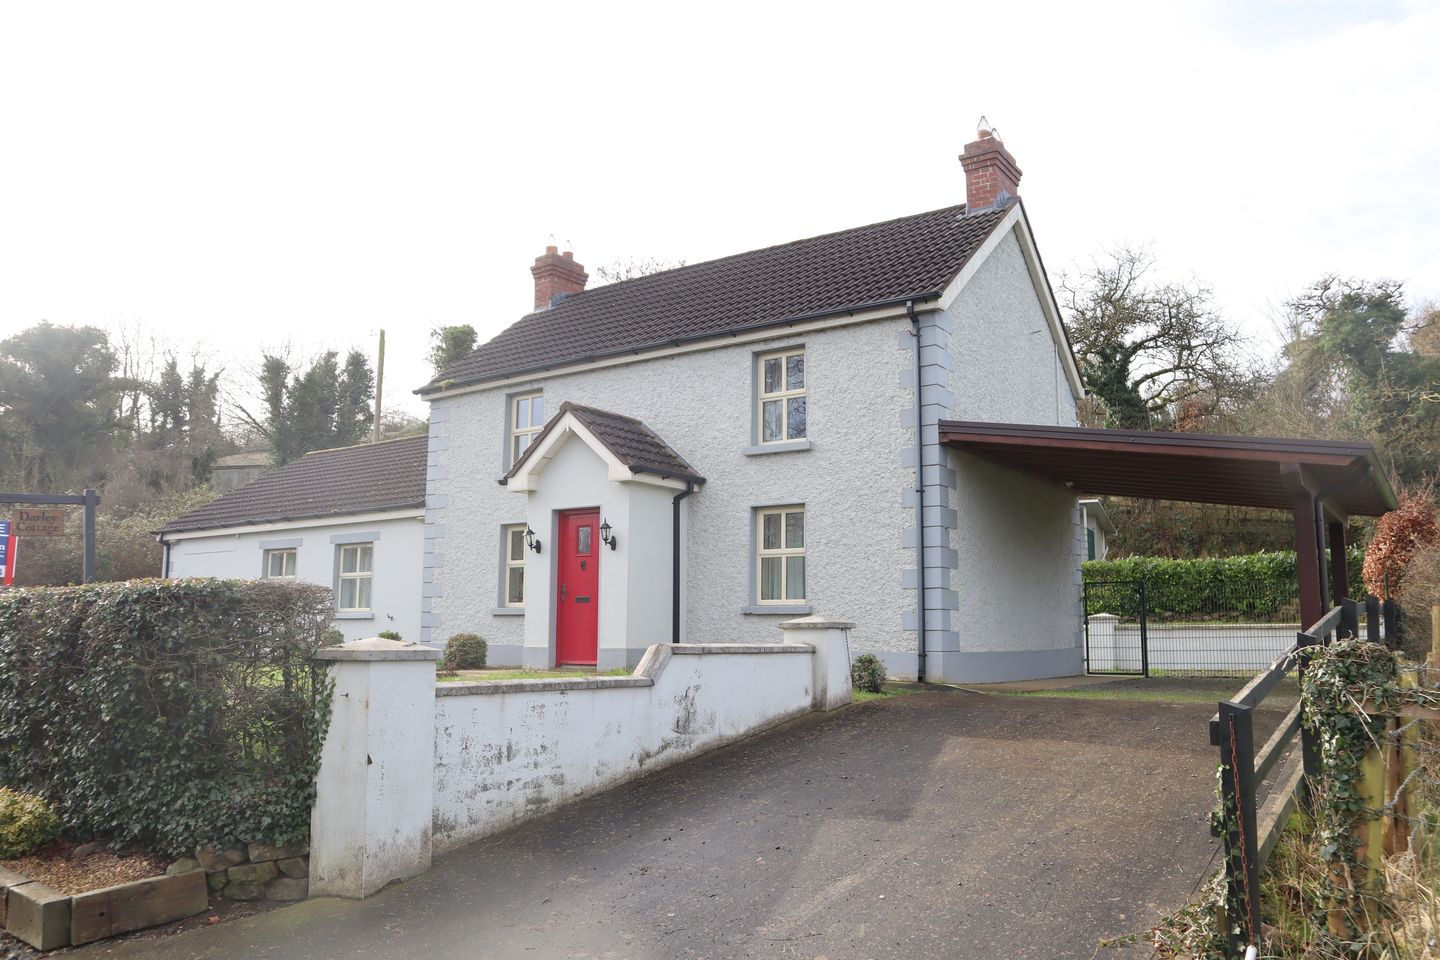 Darley Cottage, Drumboory, Carrickmacross, Co. Monaghan, A81A273